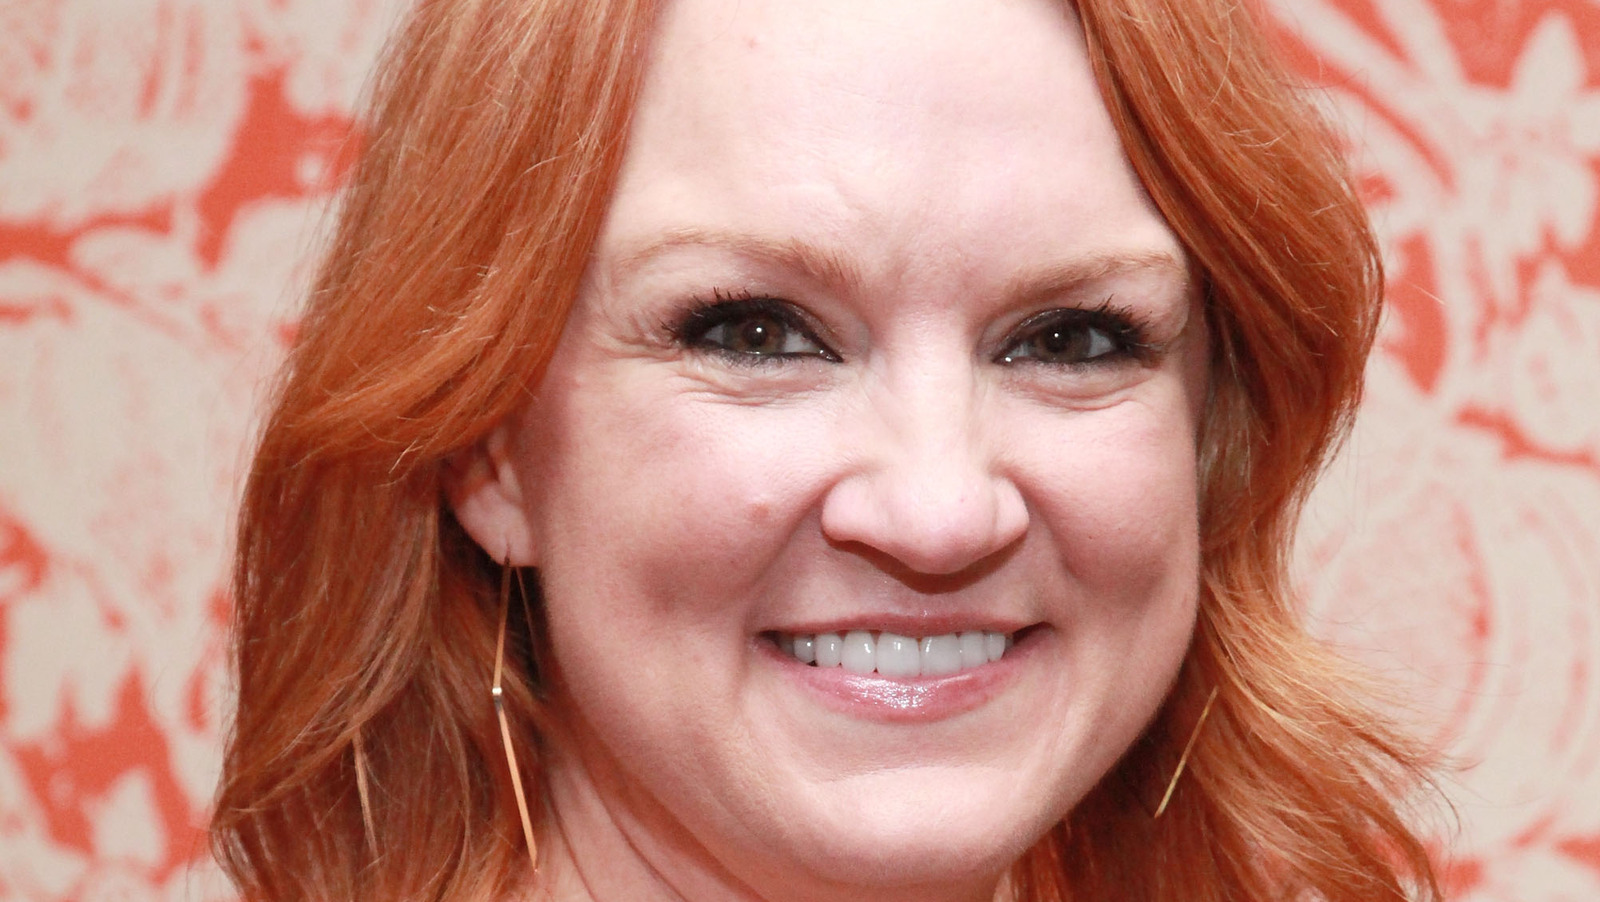 What You Didn't Know About Ree Drummond, The Pioneer Woman